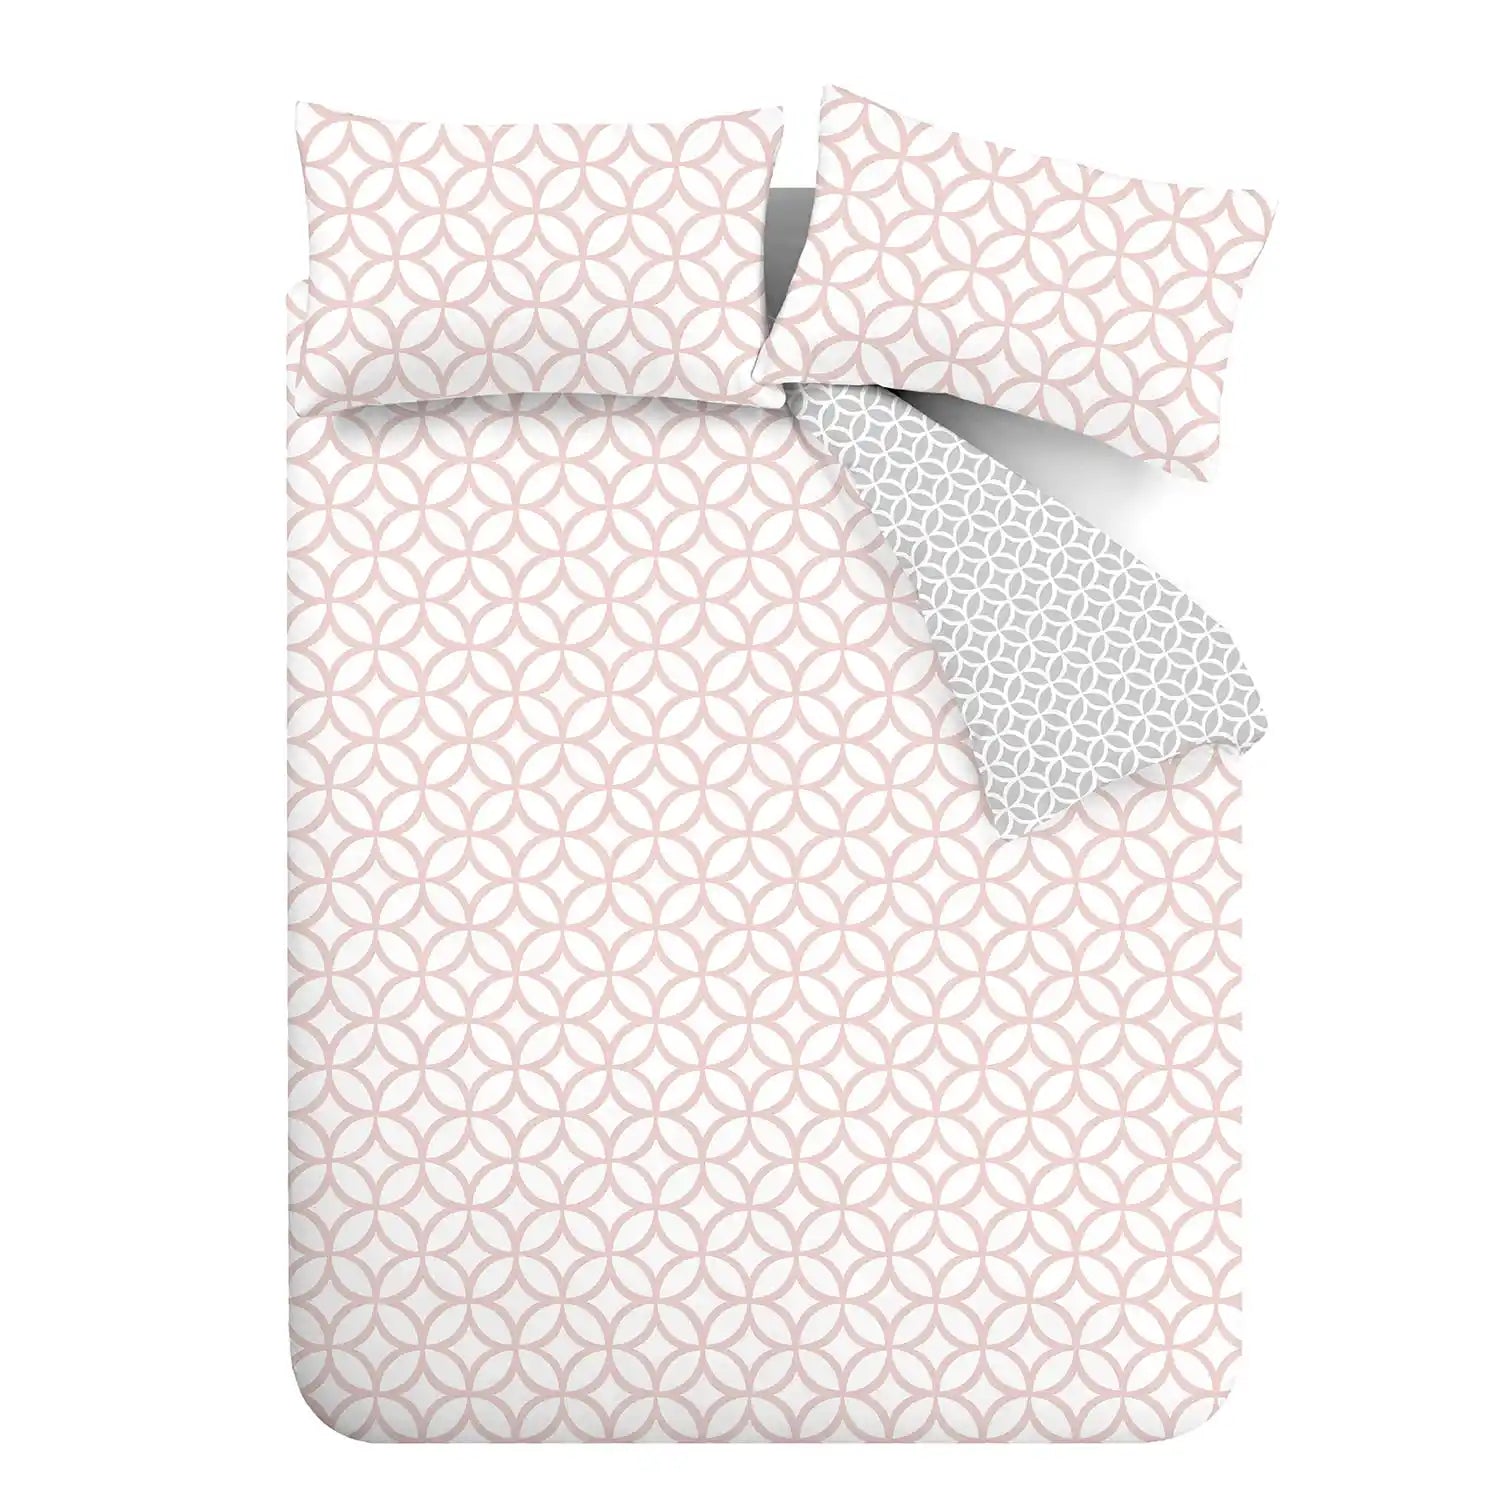  Catherine Lansfield Geo Trellis Duvet Cover Set with Pillowcases - Pink 5 Shaws Department Stores